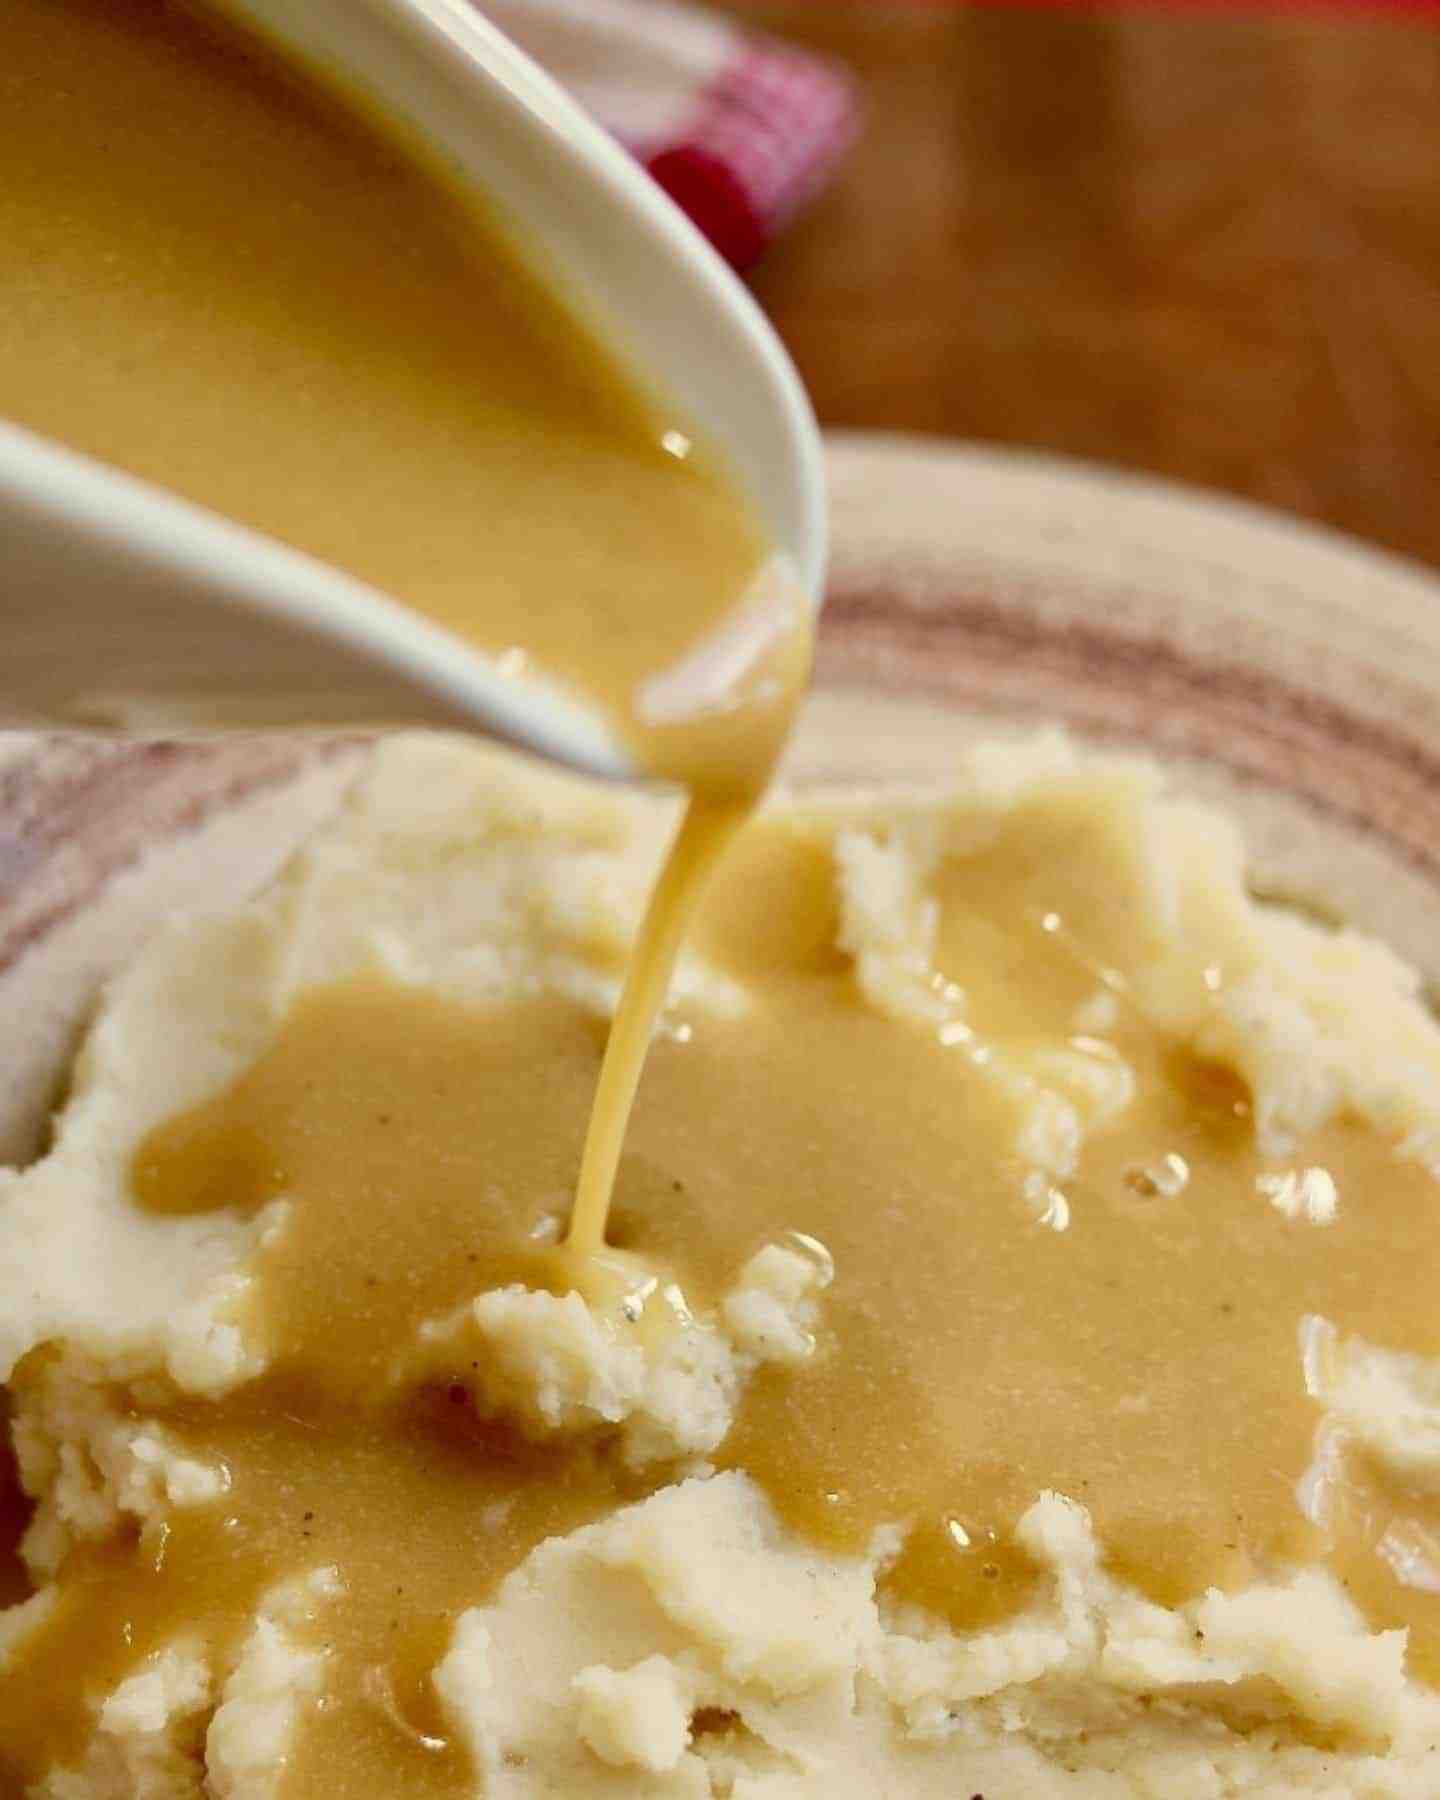 Gravy being poured on to a plate of mashed potato